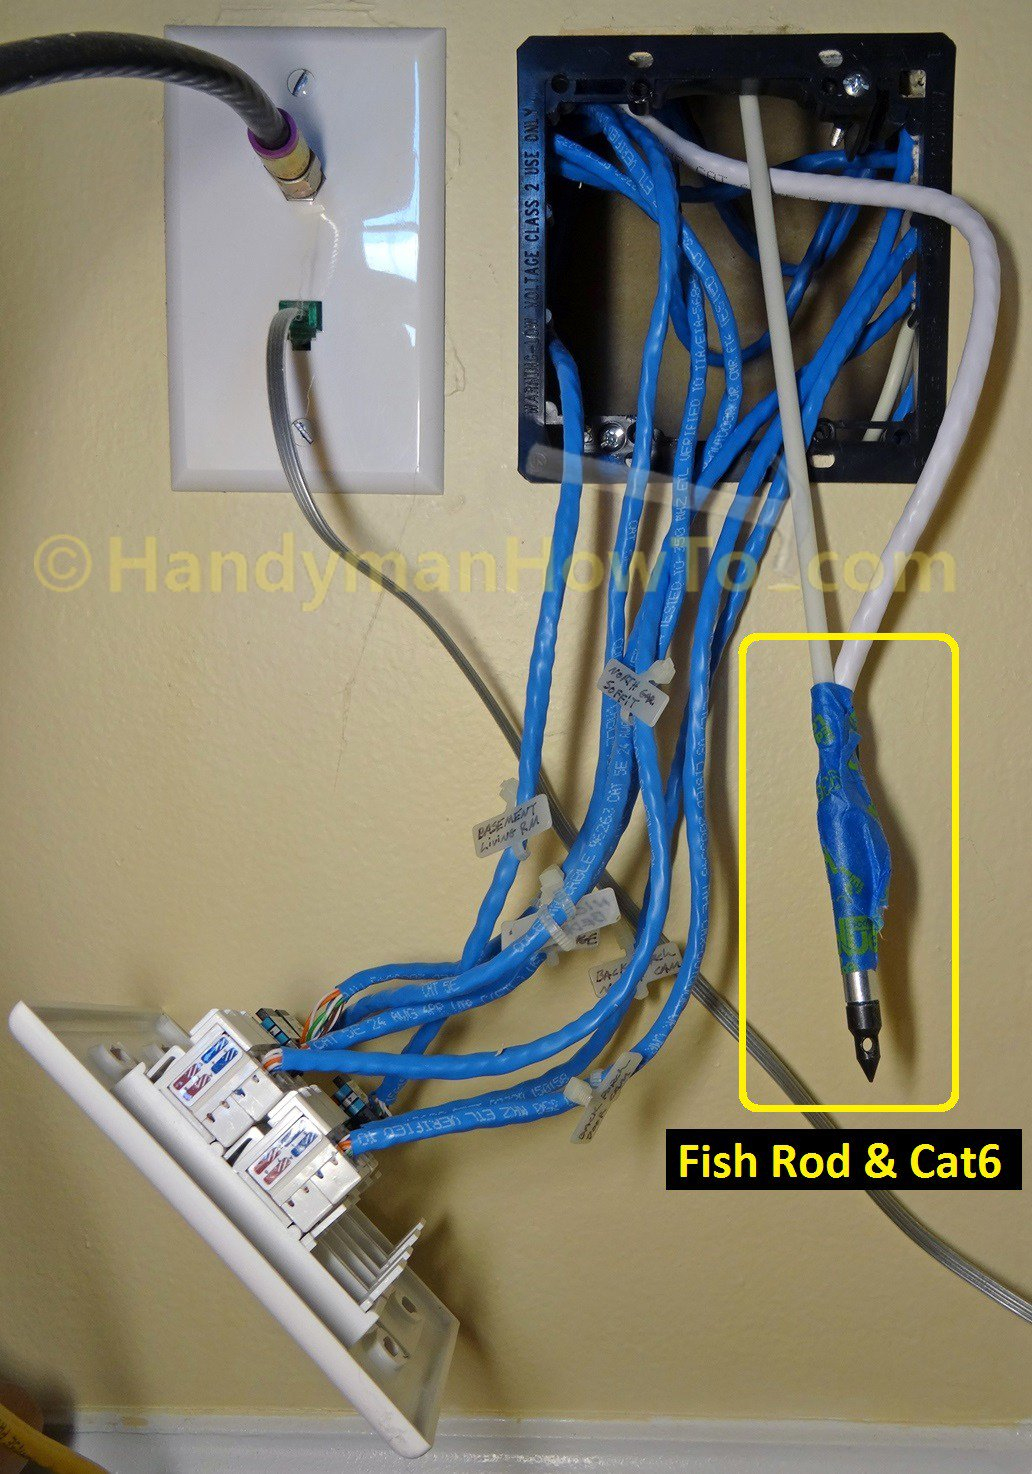 How To Wire A Cat6 Rj45 Ethernet Jack - Handymanhowto - Cat 6 Wiring Diagram For Wall Plates